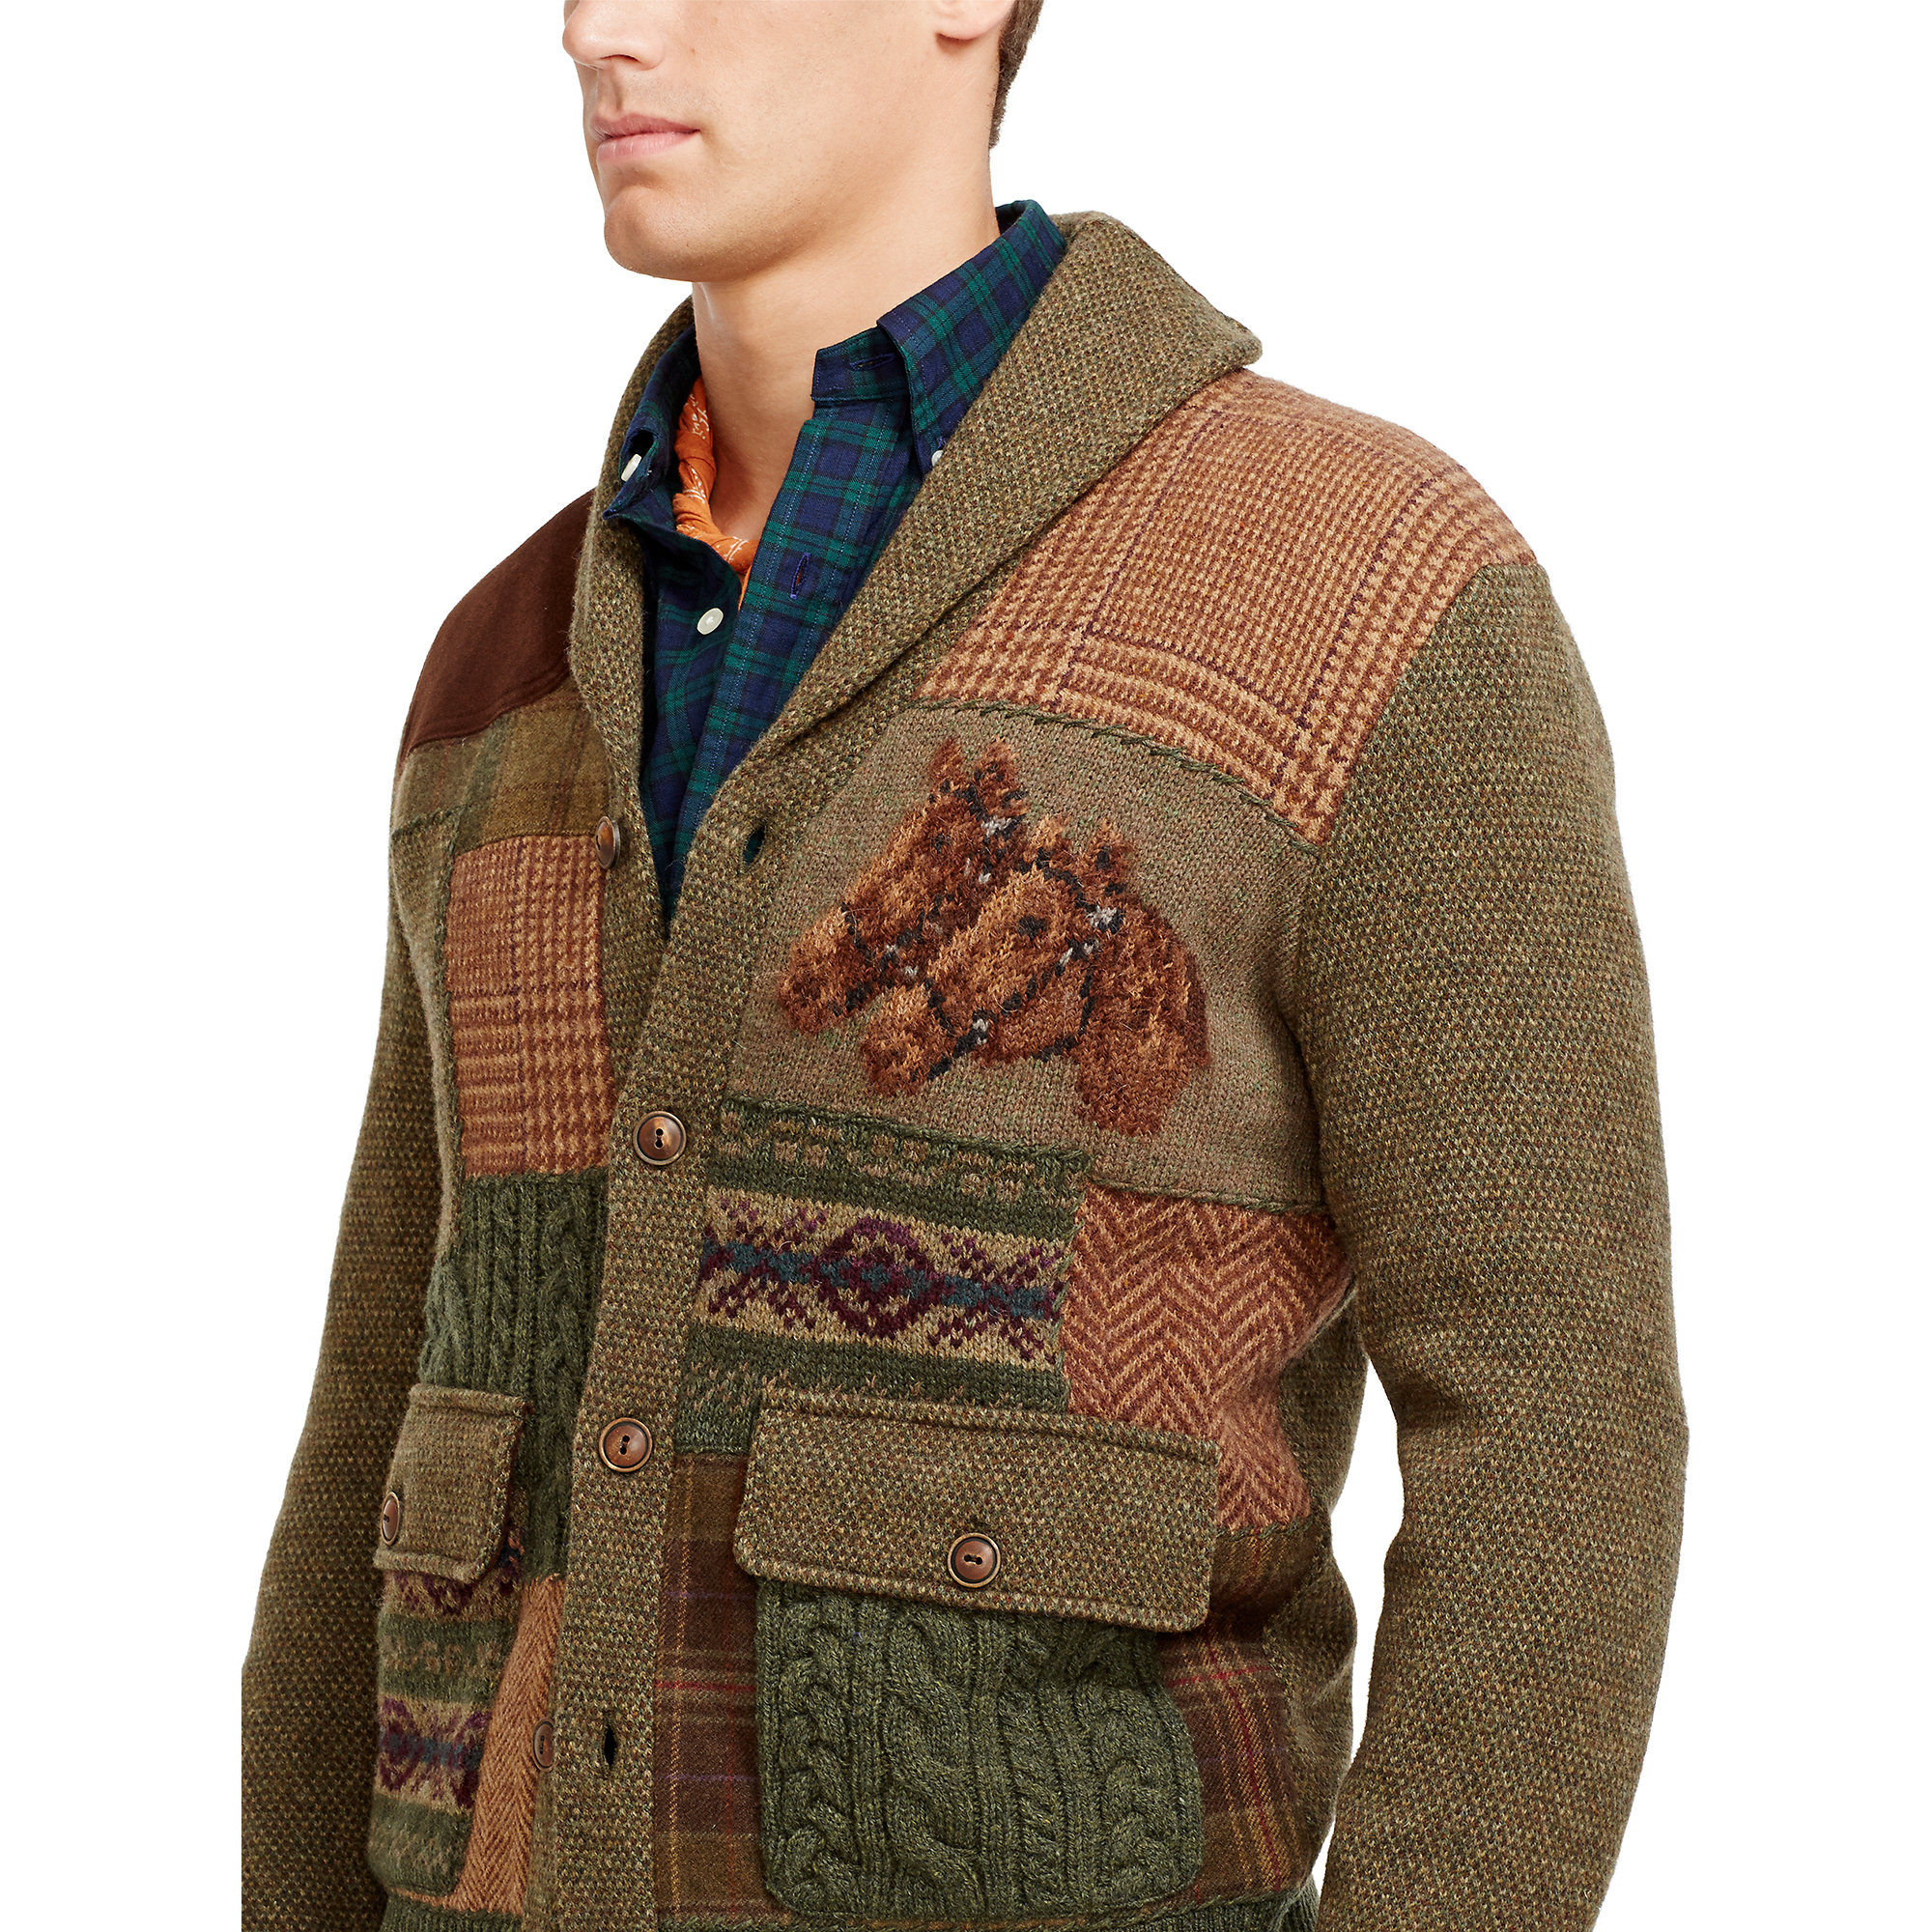 Polo Ralph Lauren Patchwork Shawl Cardigan in Brown Patchwork (Brown) for  Men - Lyst